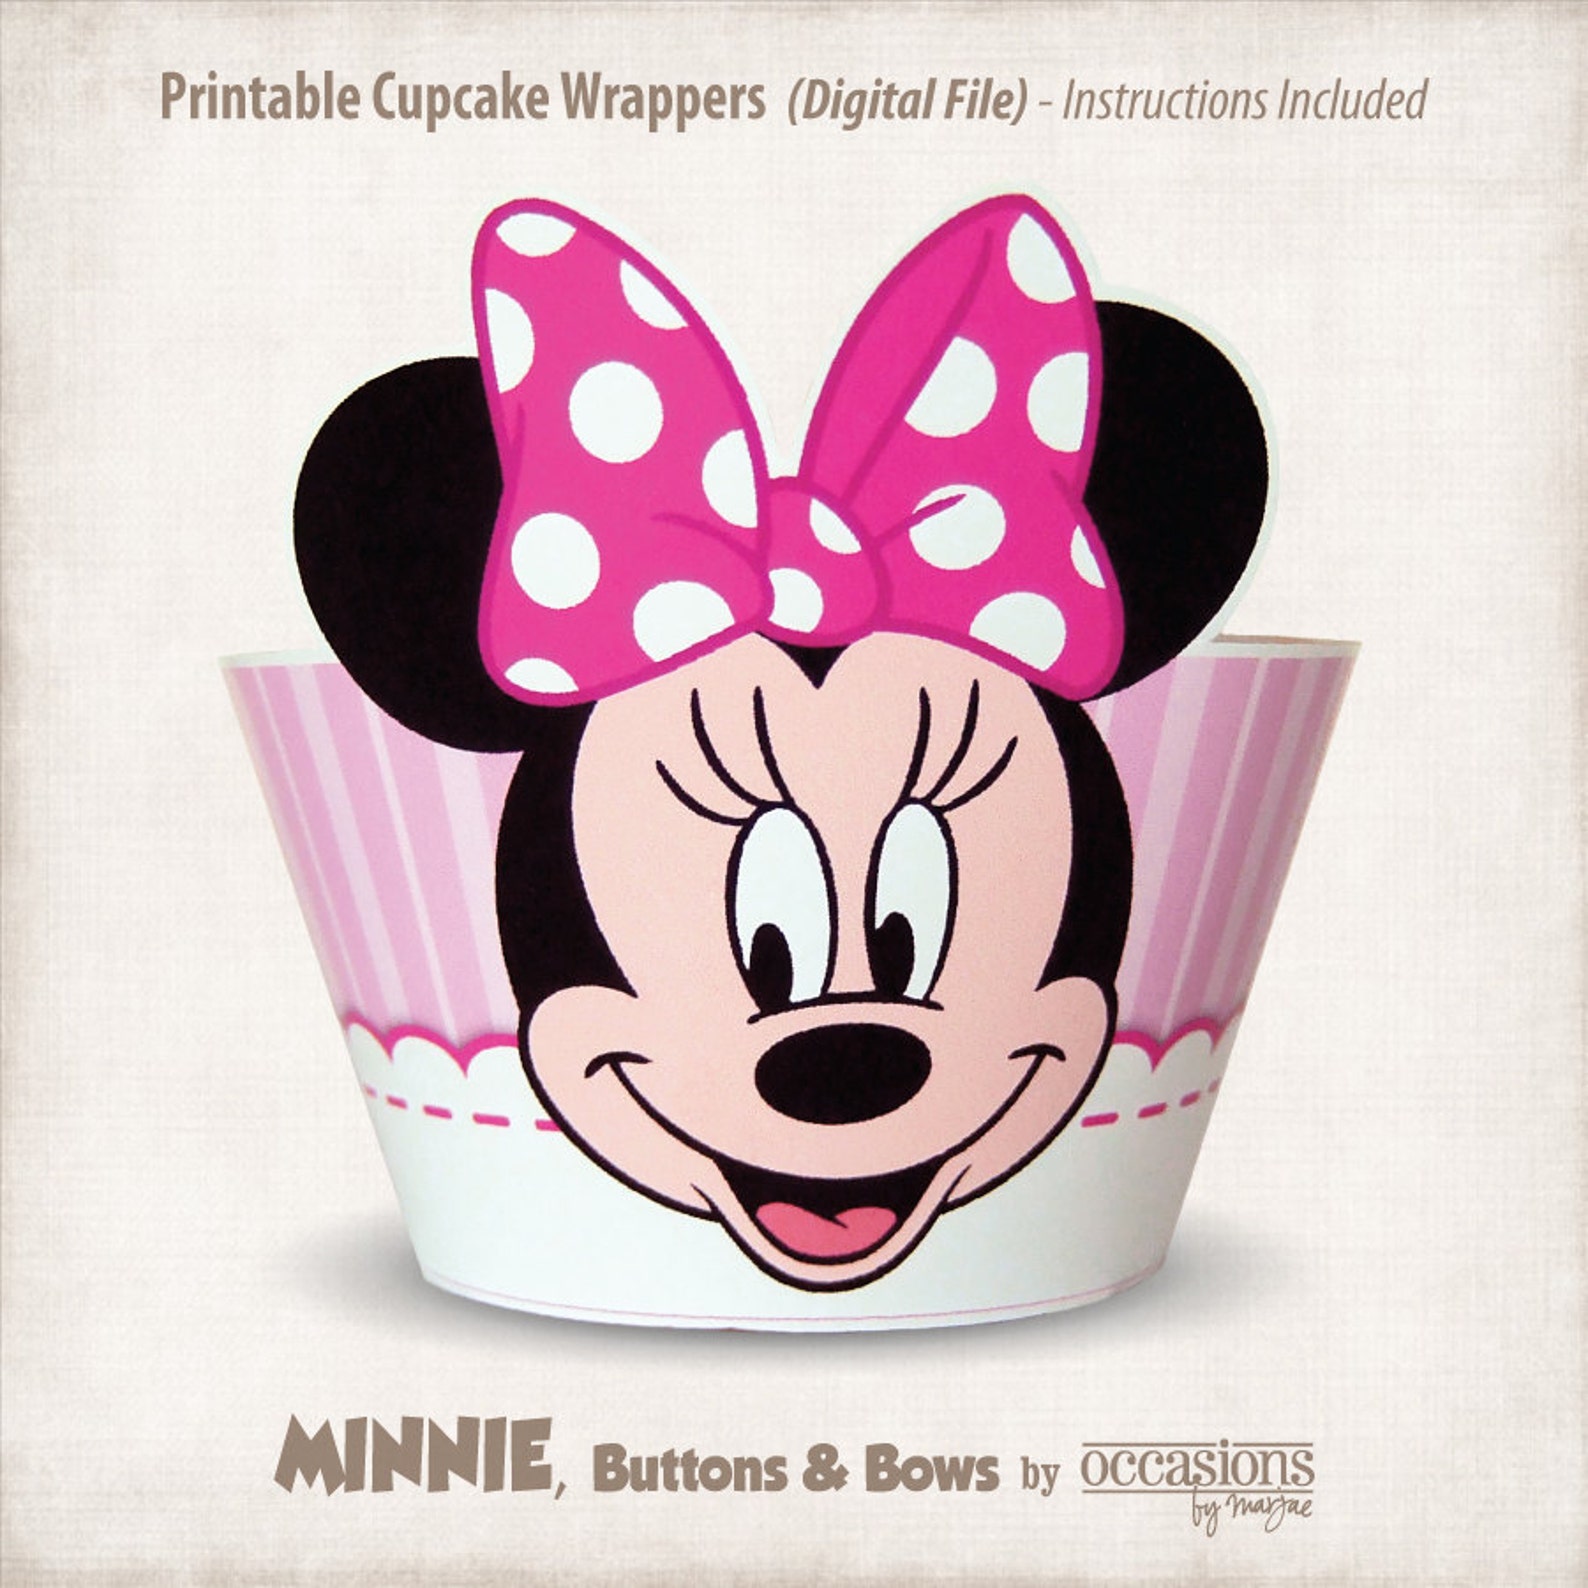 INSTANT DOWNLOAD Printable Minnie Mouse Cupcake Wrappers 0 - изображение.